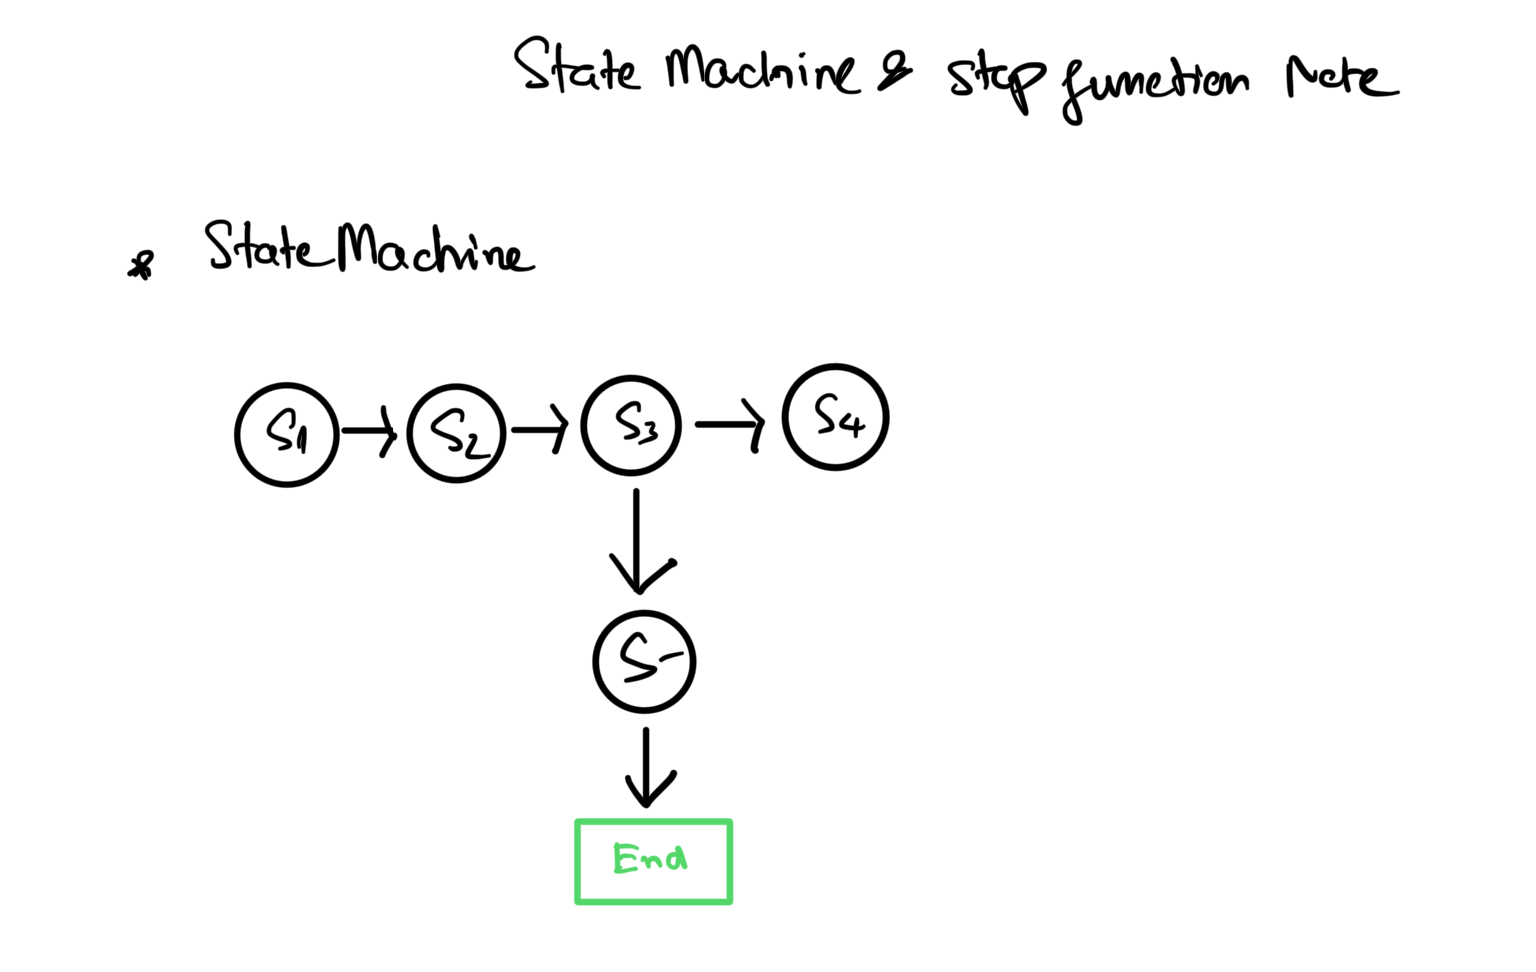 State Machine, Step function Note